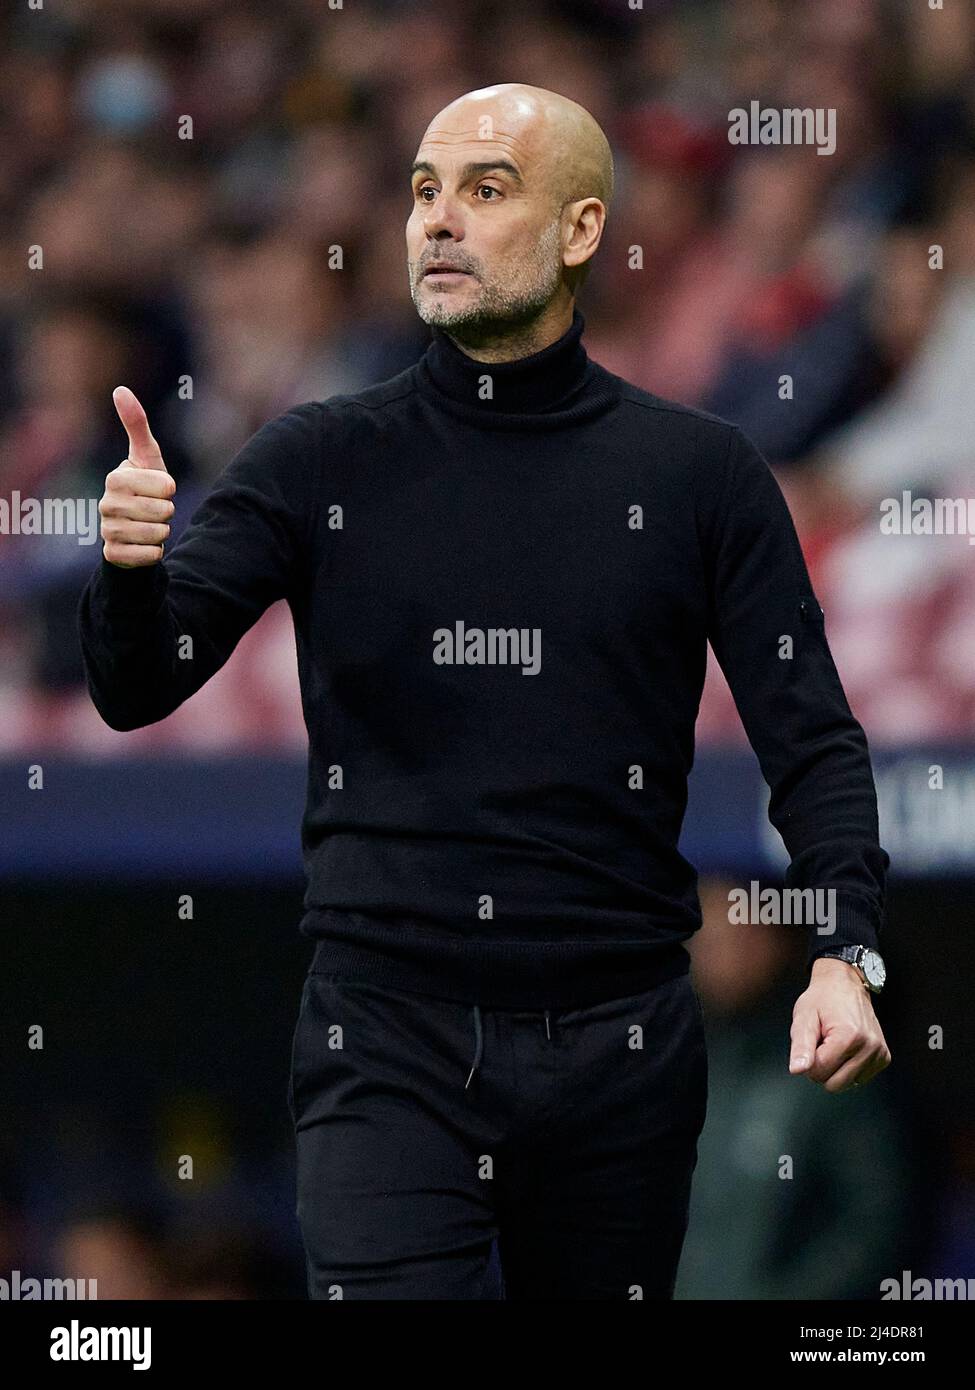 Manchester City head coach Pep Guardiola    during the UEFA Champions League match, Quarter Final, Second Leg, between Atletico de Madrid and Manchester City played at Wanda Metropolitano Stadium on April 13, 2022 in Madrid, Spain. (Photo by Ruben Albarran / PRESSINPHOTO) Stock Photo